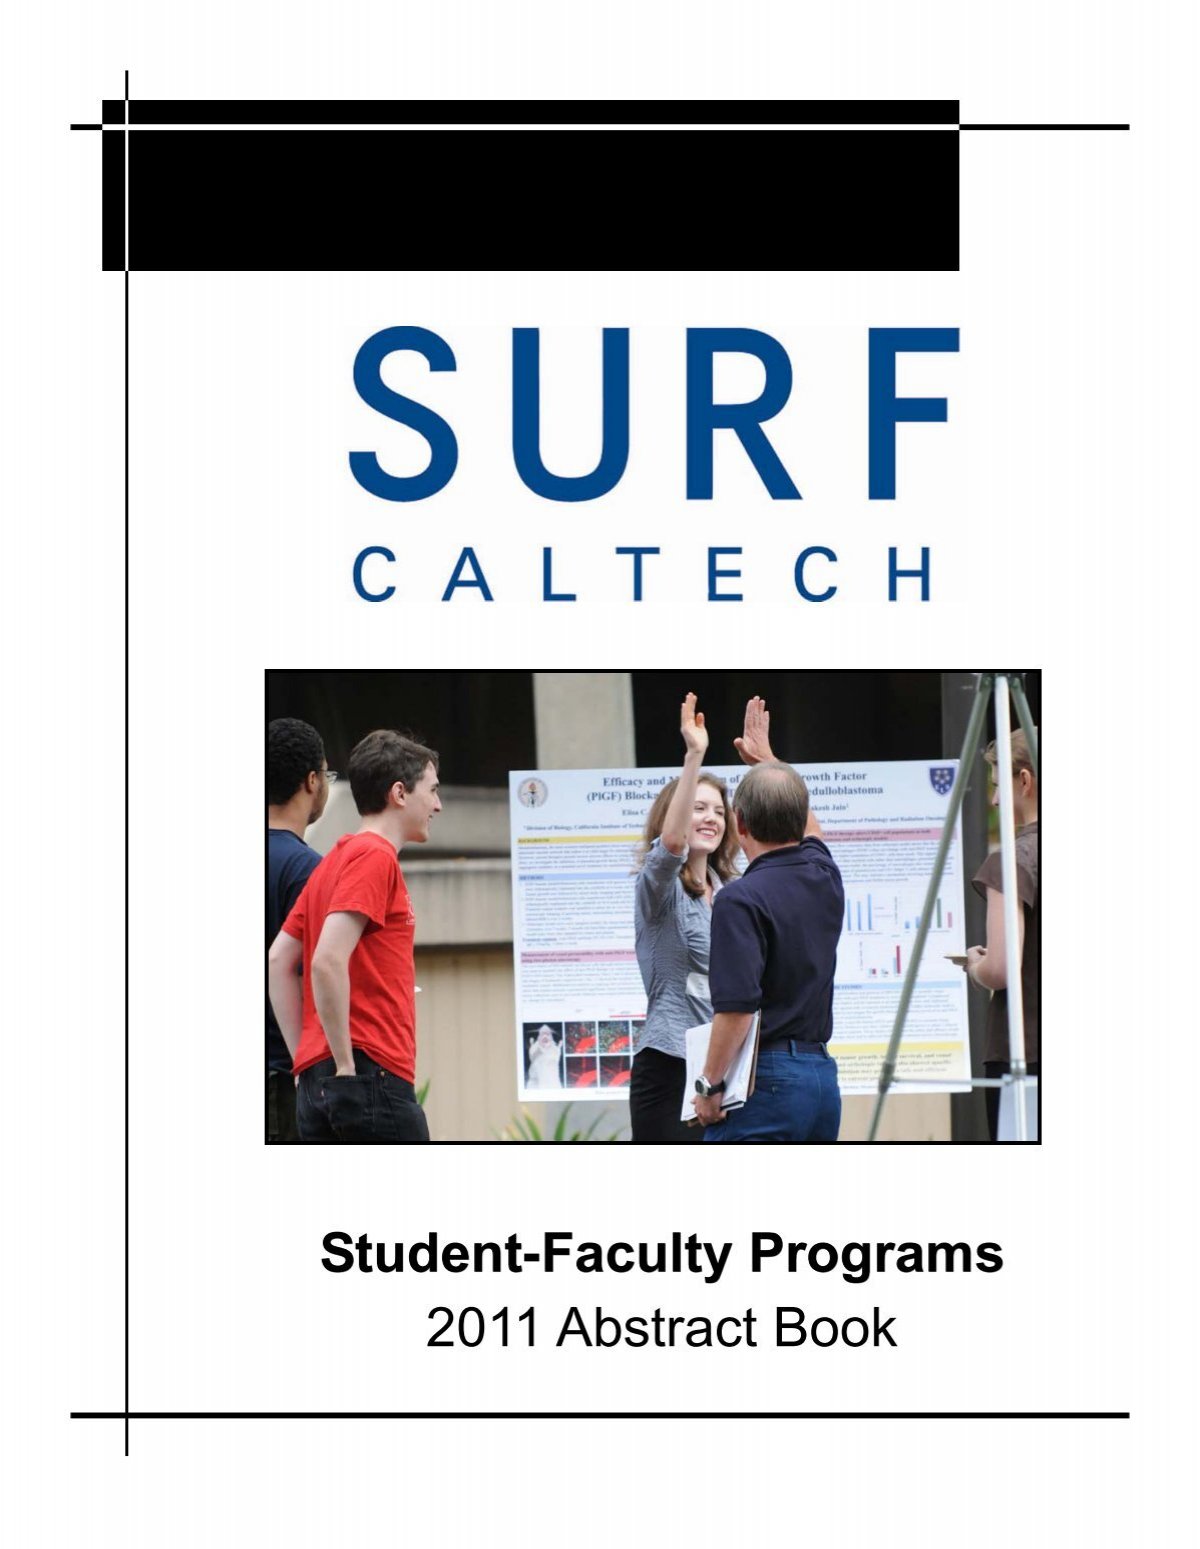 Student-Faculty Programs 2011 Abstract Book - Summer